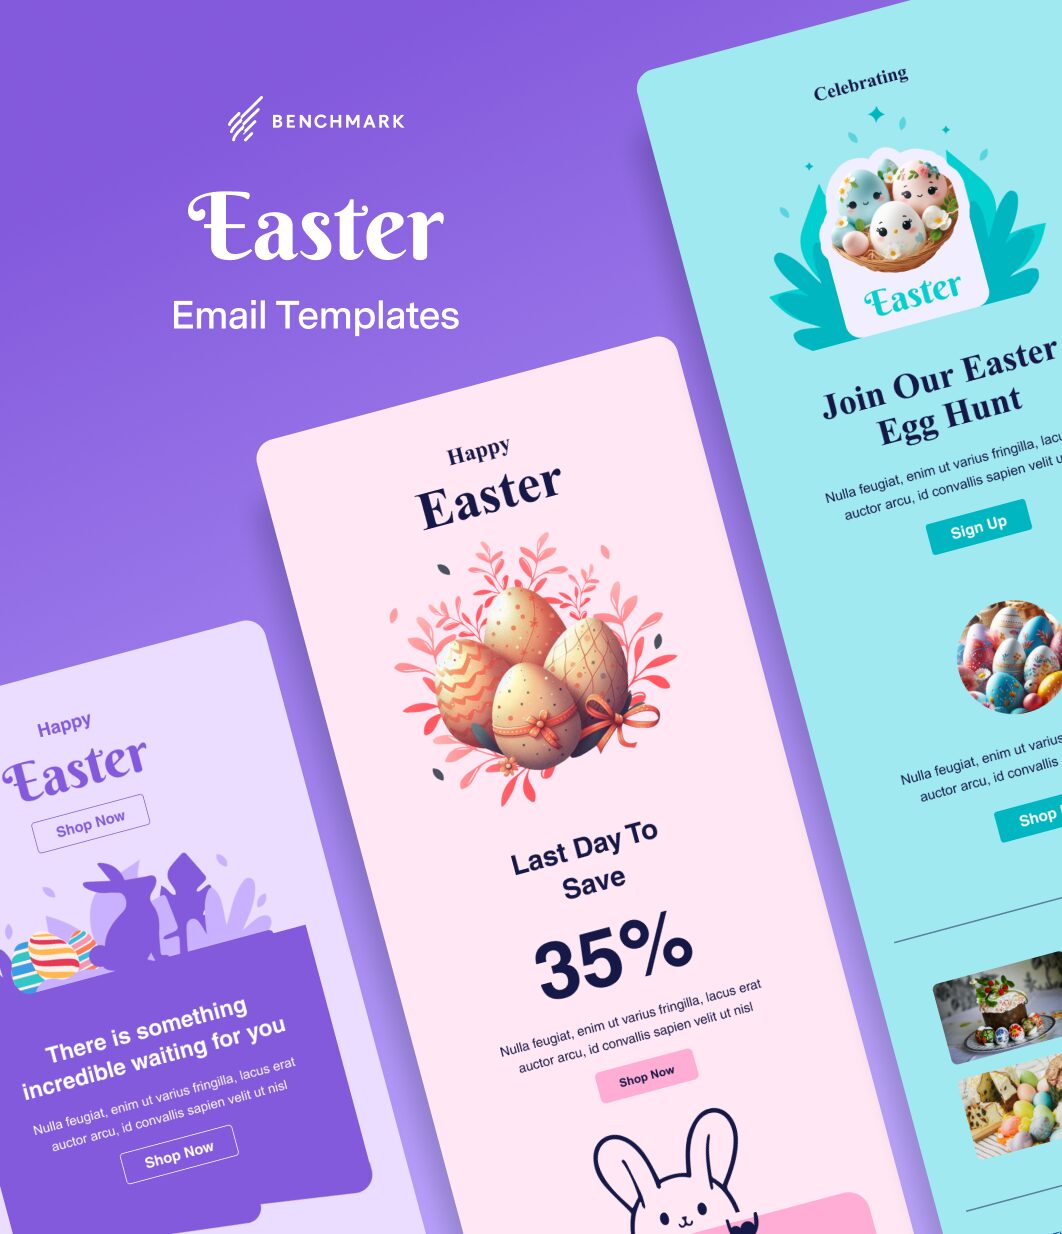 resource image-Easter email templates